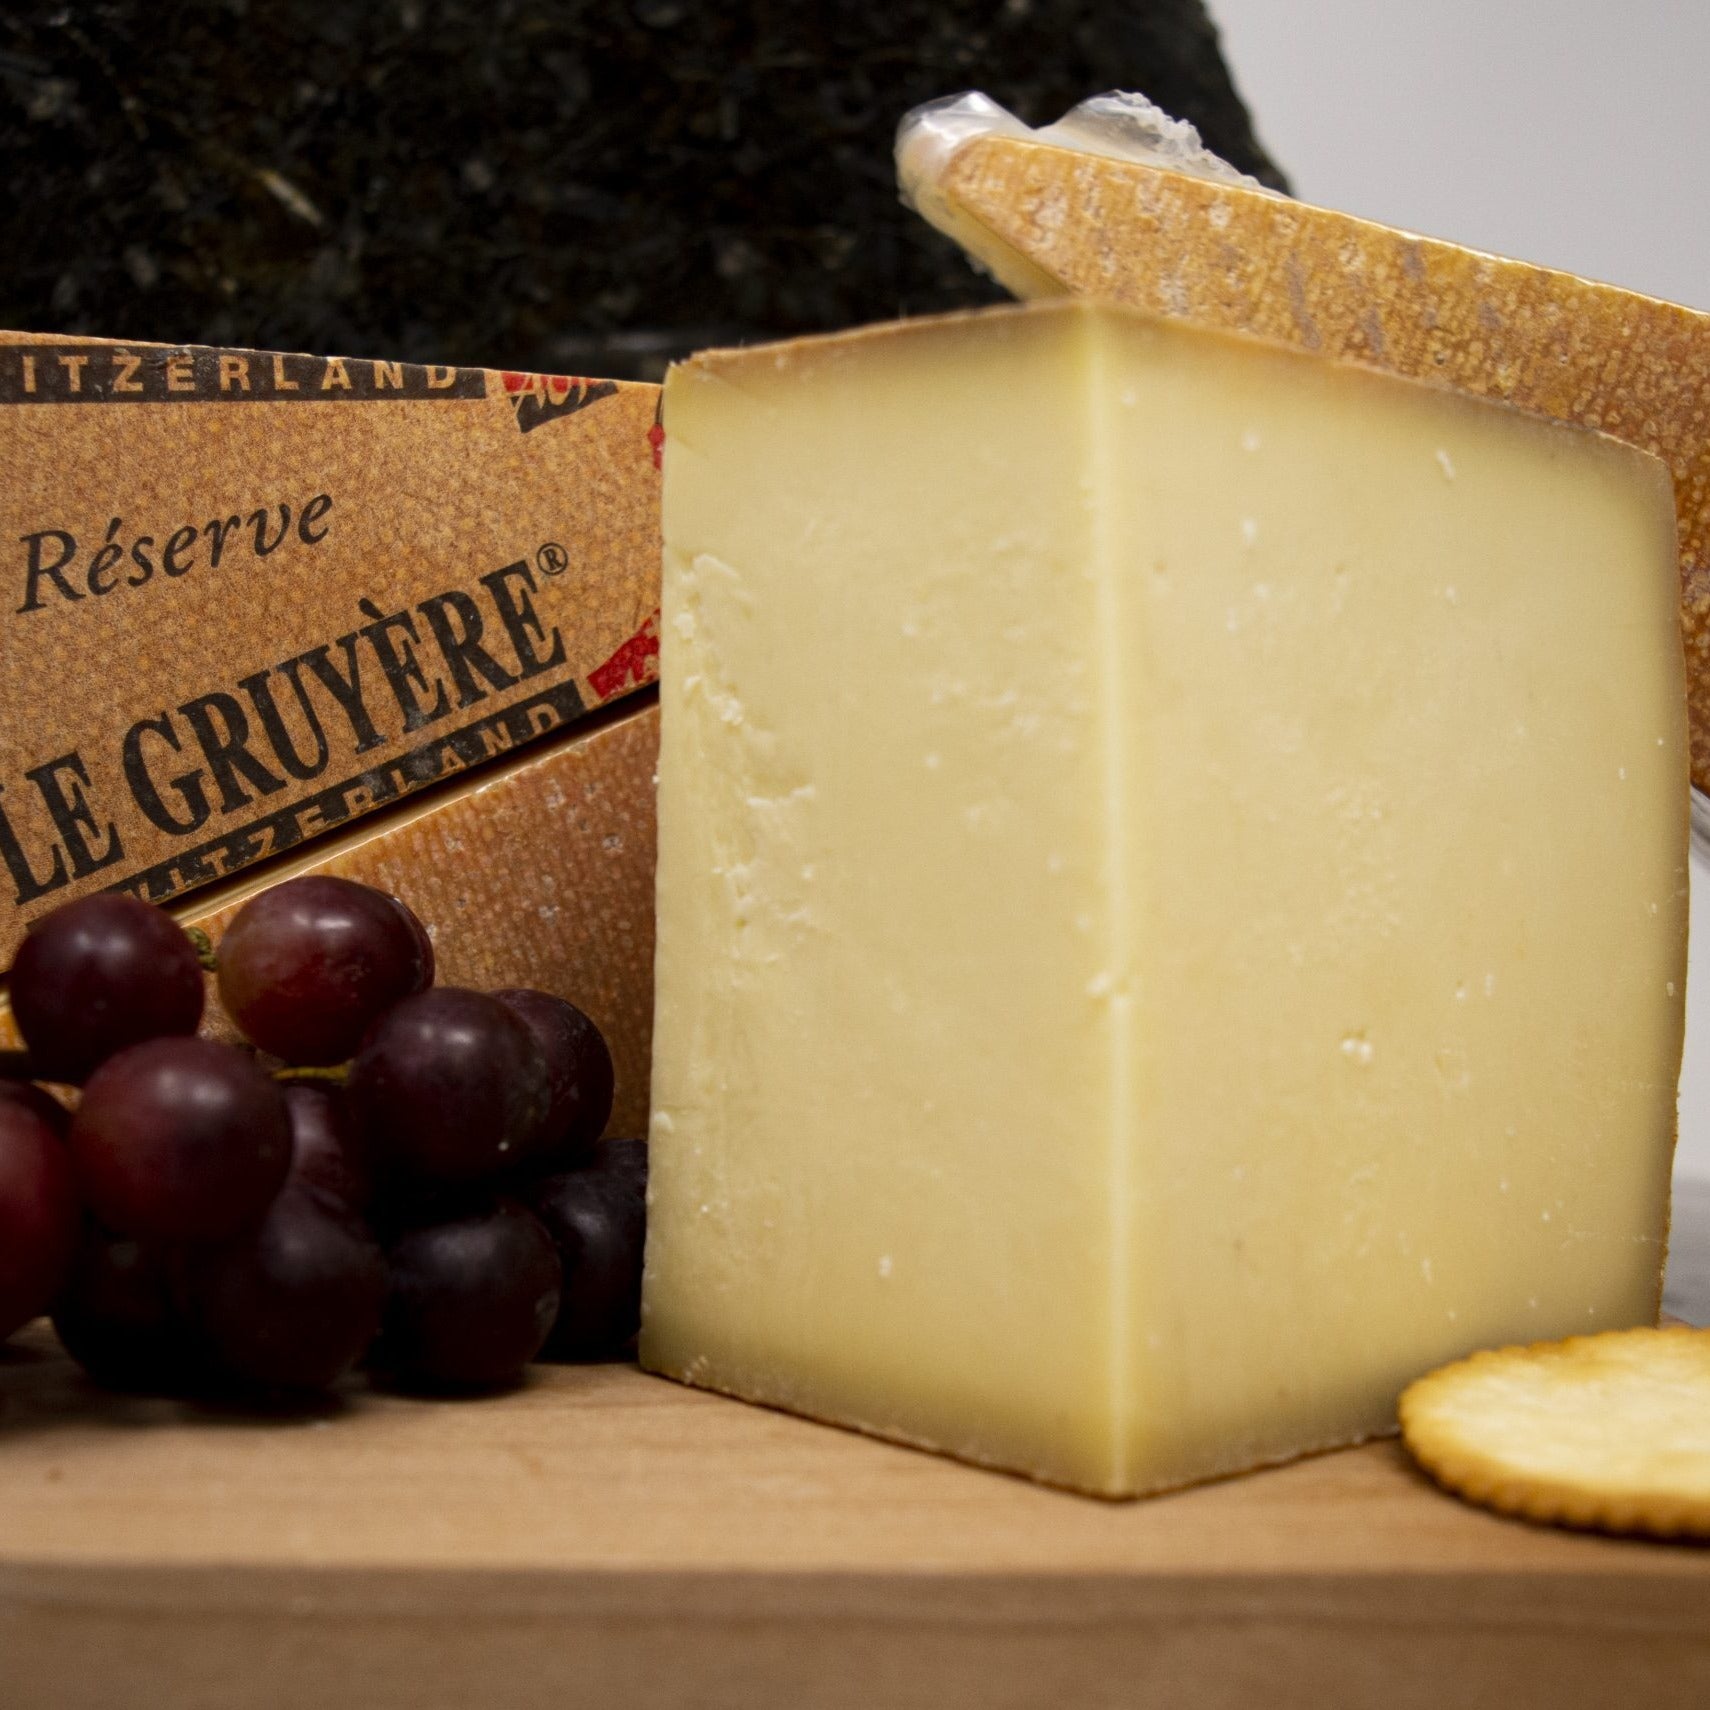 Le Gruyère® AOP Cheese - Made in Switzerland - Natural Cheese